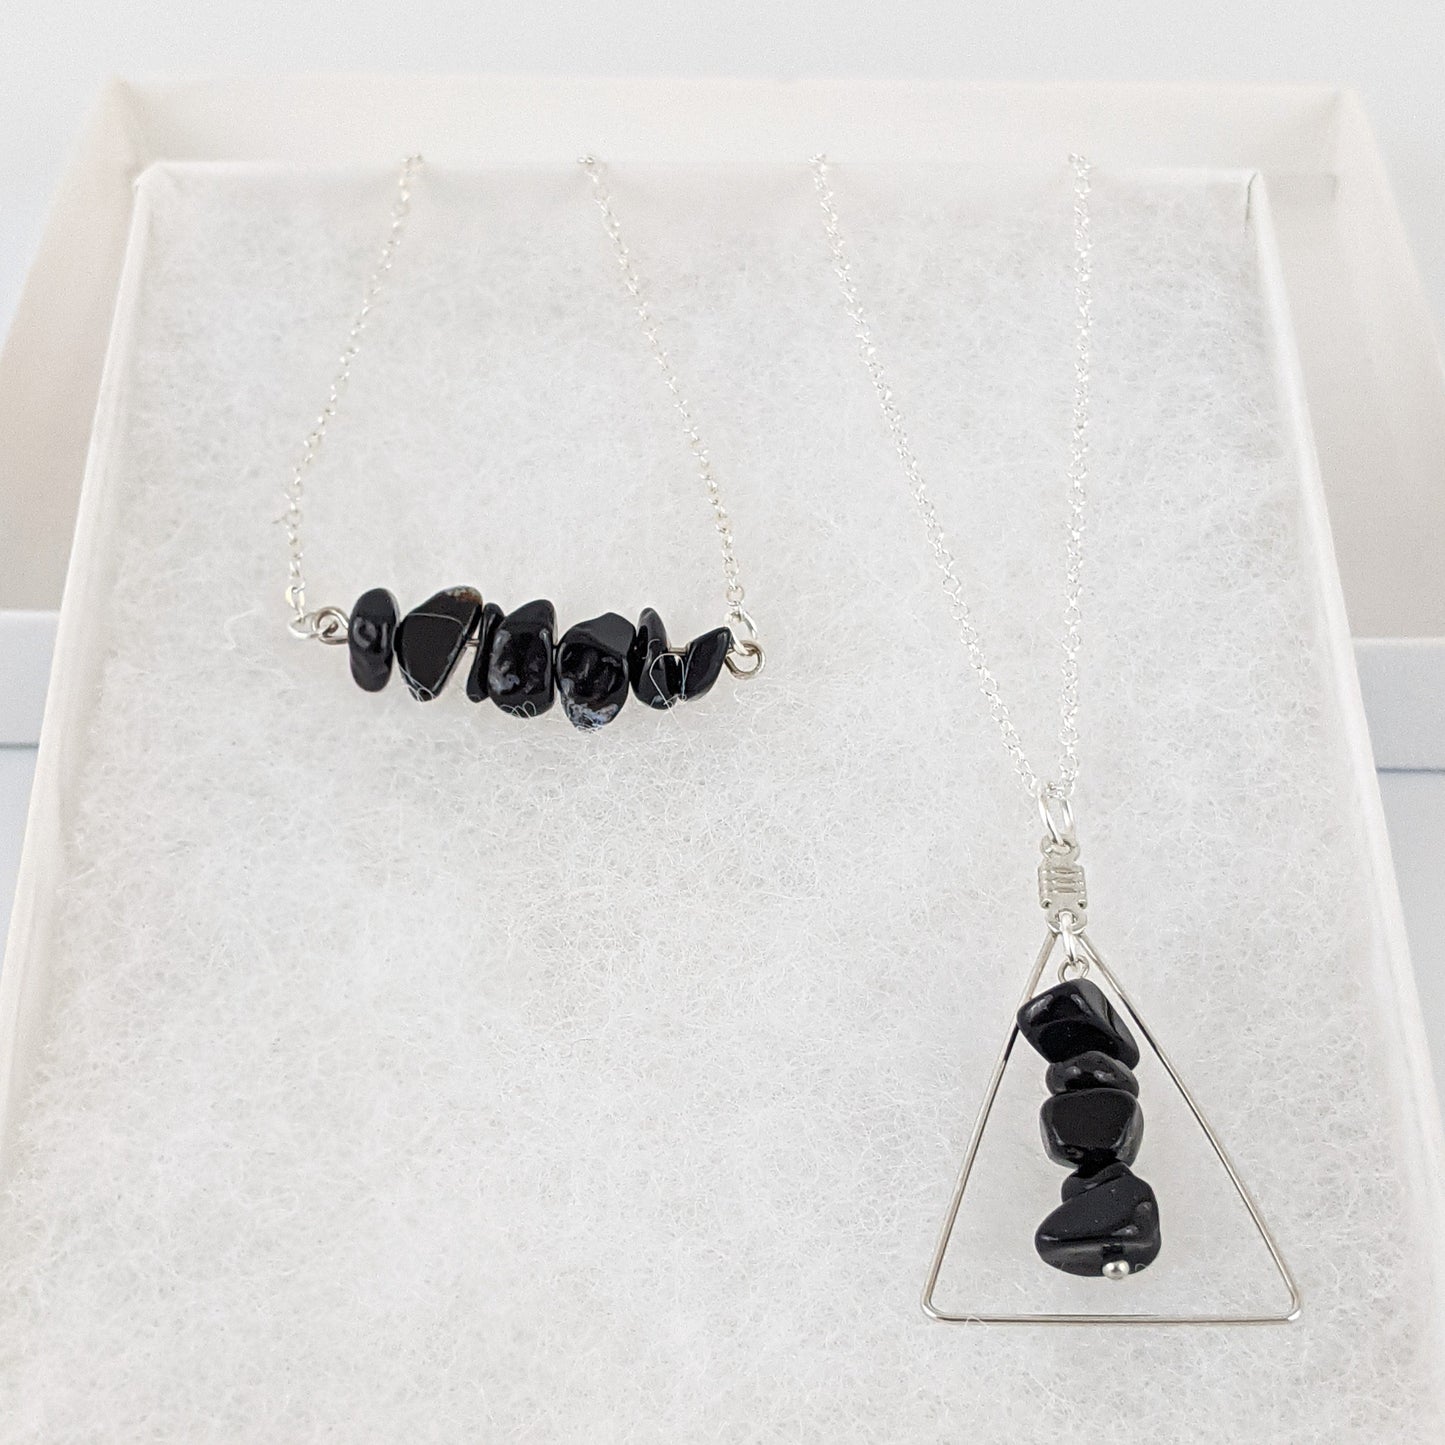 Black Agate Bar and Triangle Pendant Necklace Set